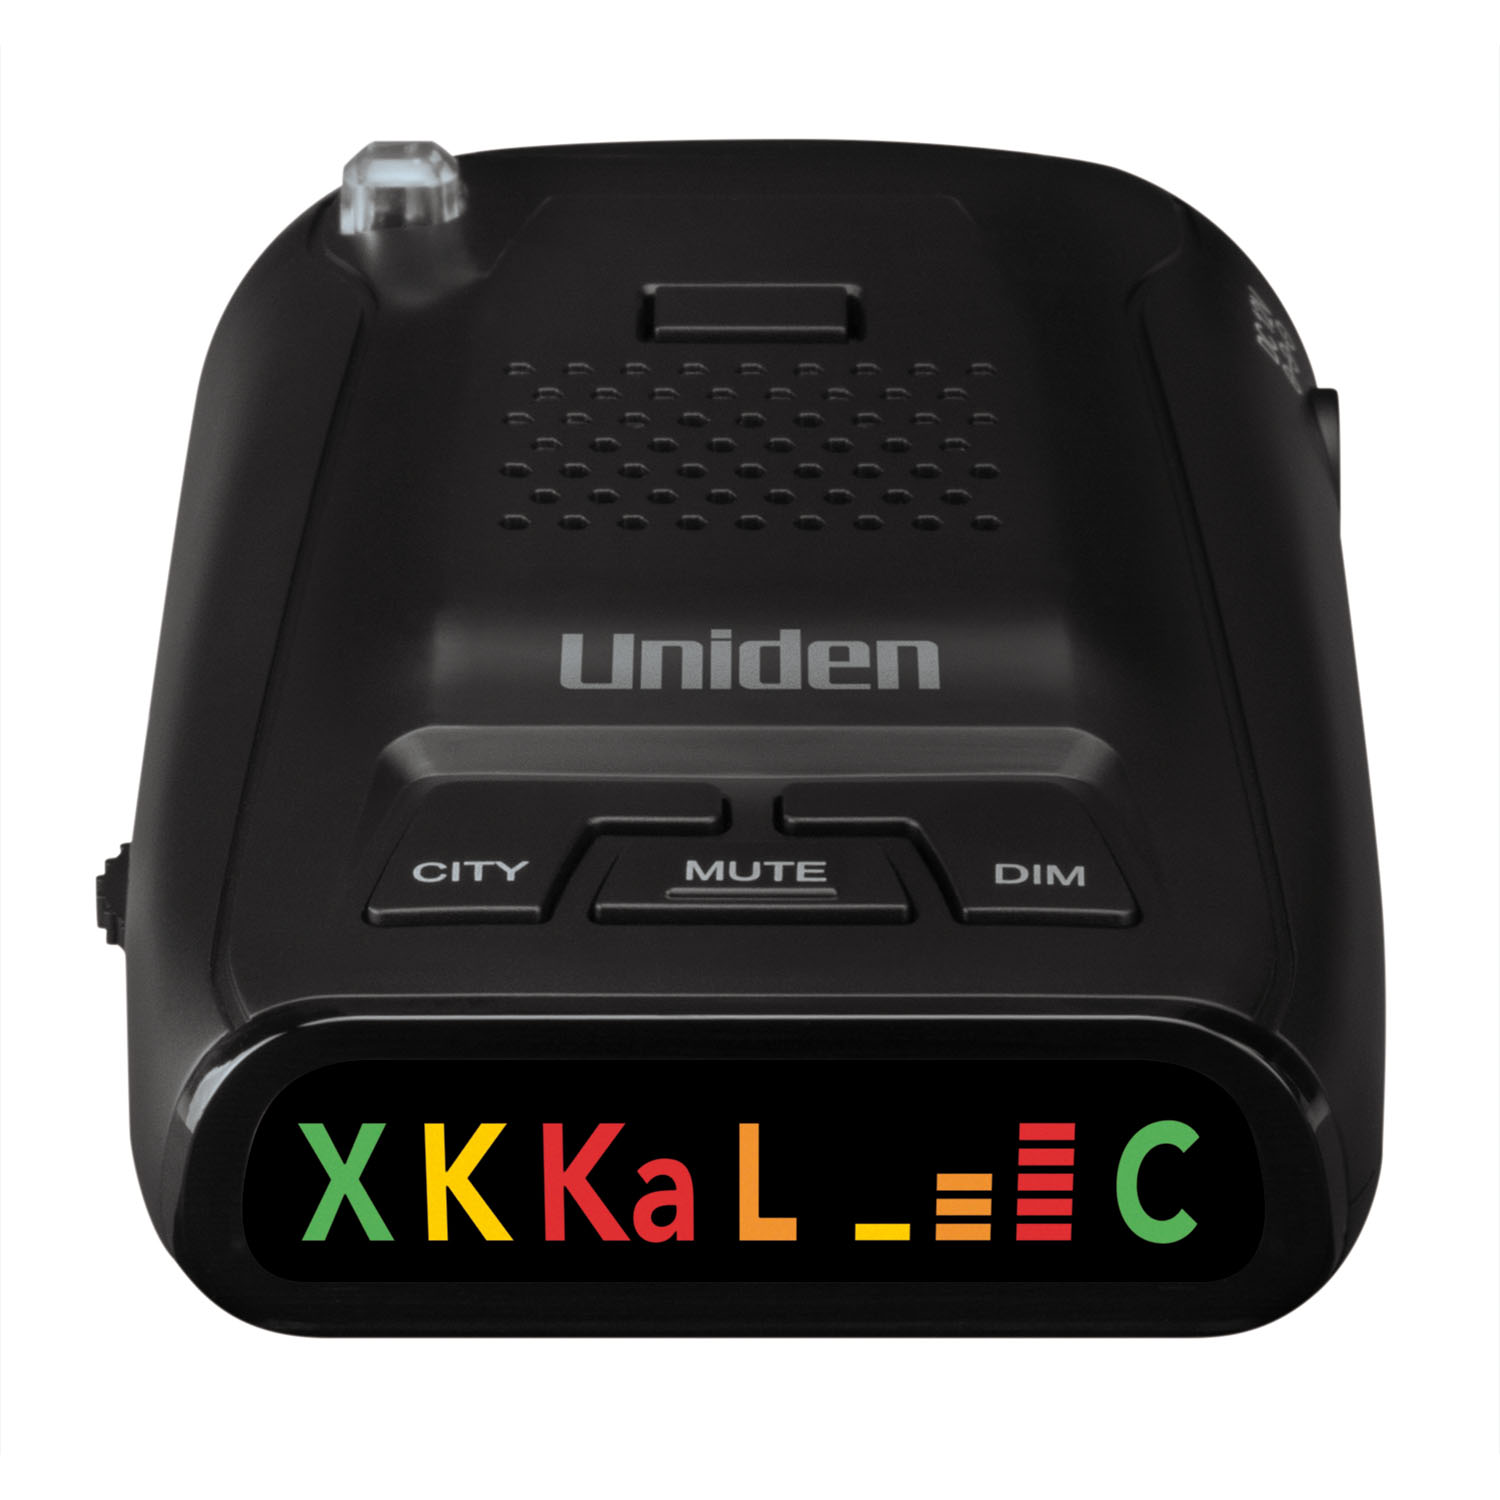 UNIDEN - LONG RANGE RADAR/LASER DETECTOR WITH 360?? PROTECTION FROM ALL RADAR & LASER GUNS, HIGHWAY/CITY MODES, MUTE & BRIGHT/DI